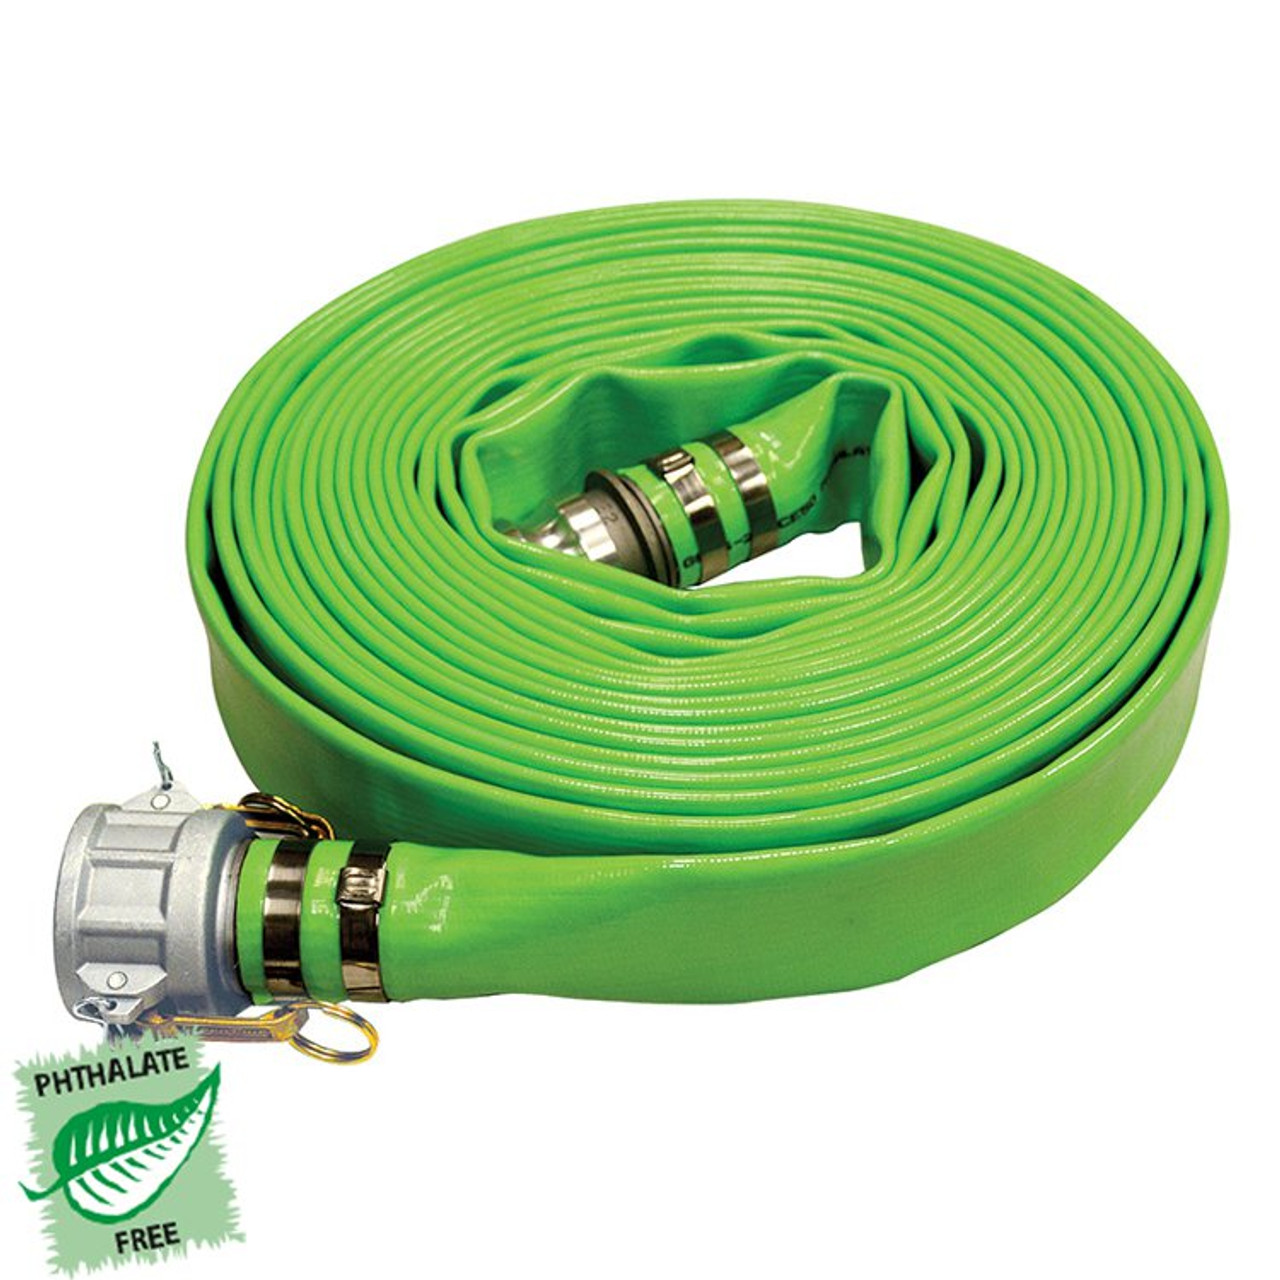 2" x 50' Phthalate Free Green Lay-Flat Discharge Hose Assembly   G975-200CE50